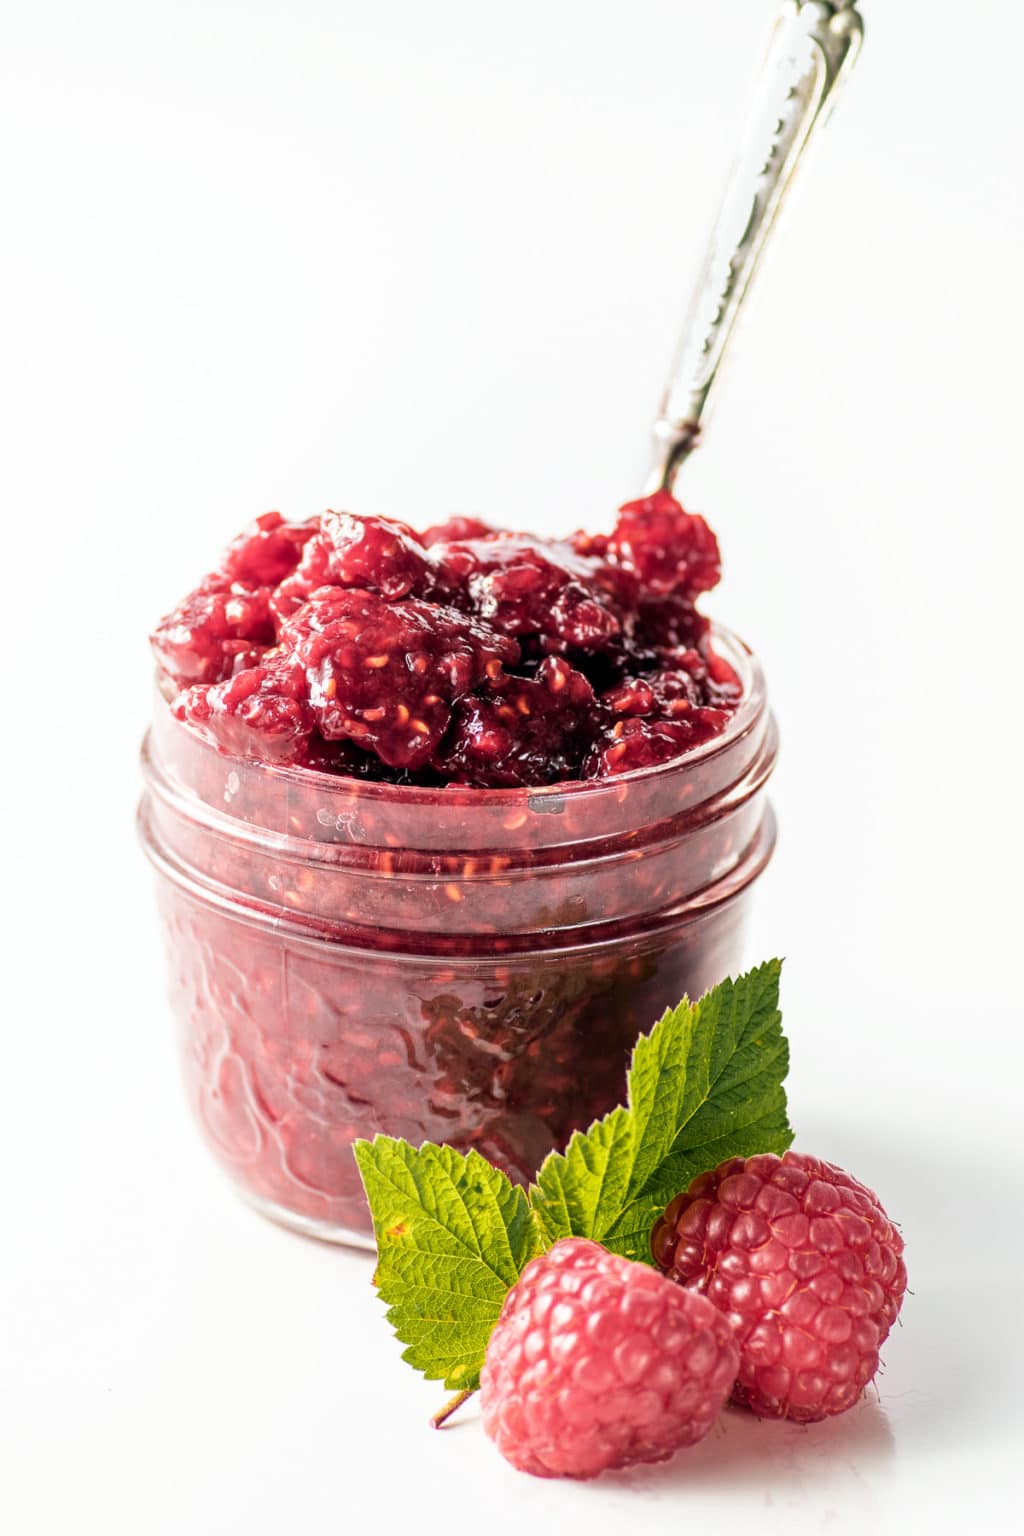 Sugar-Free Raspberry Jam - Shelf Stable, Low Carb and Delicious!